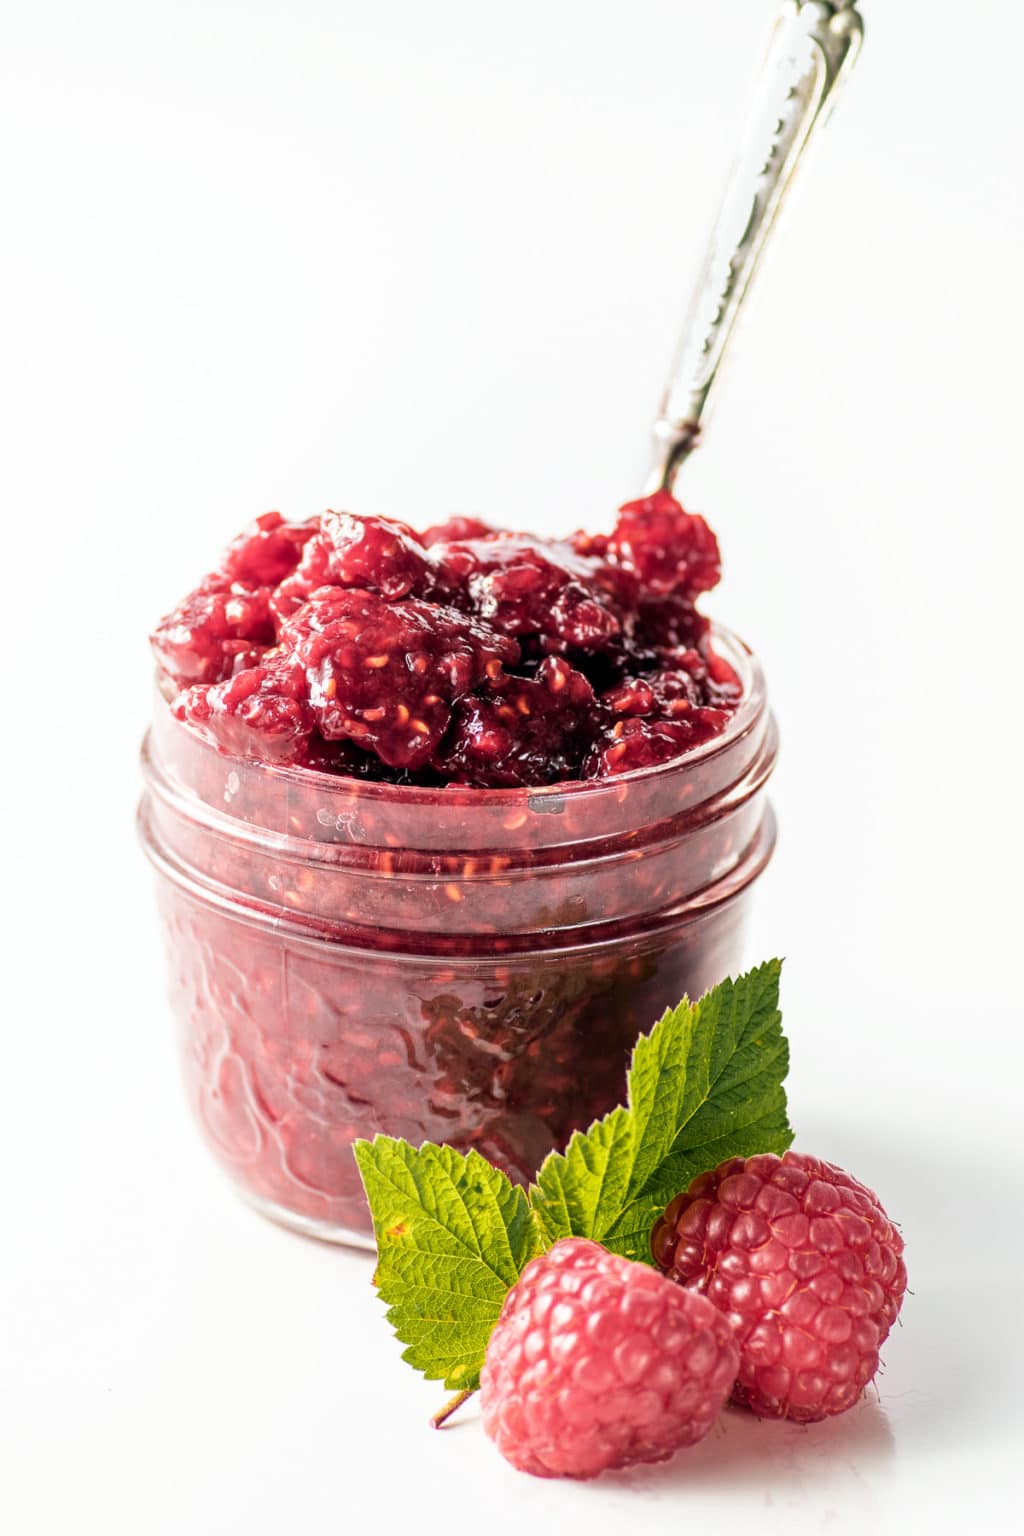 Sugar-Free Raspberry Jam - Shelf Stable, Low Carb and Delicious!